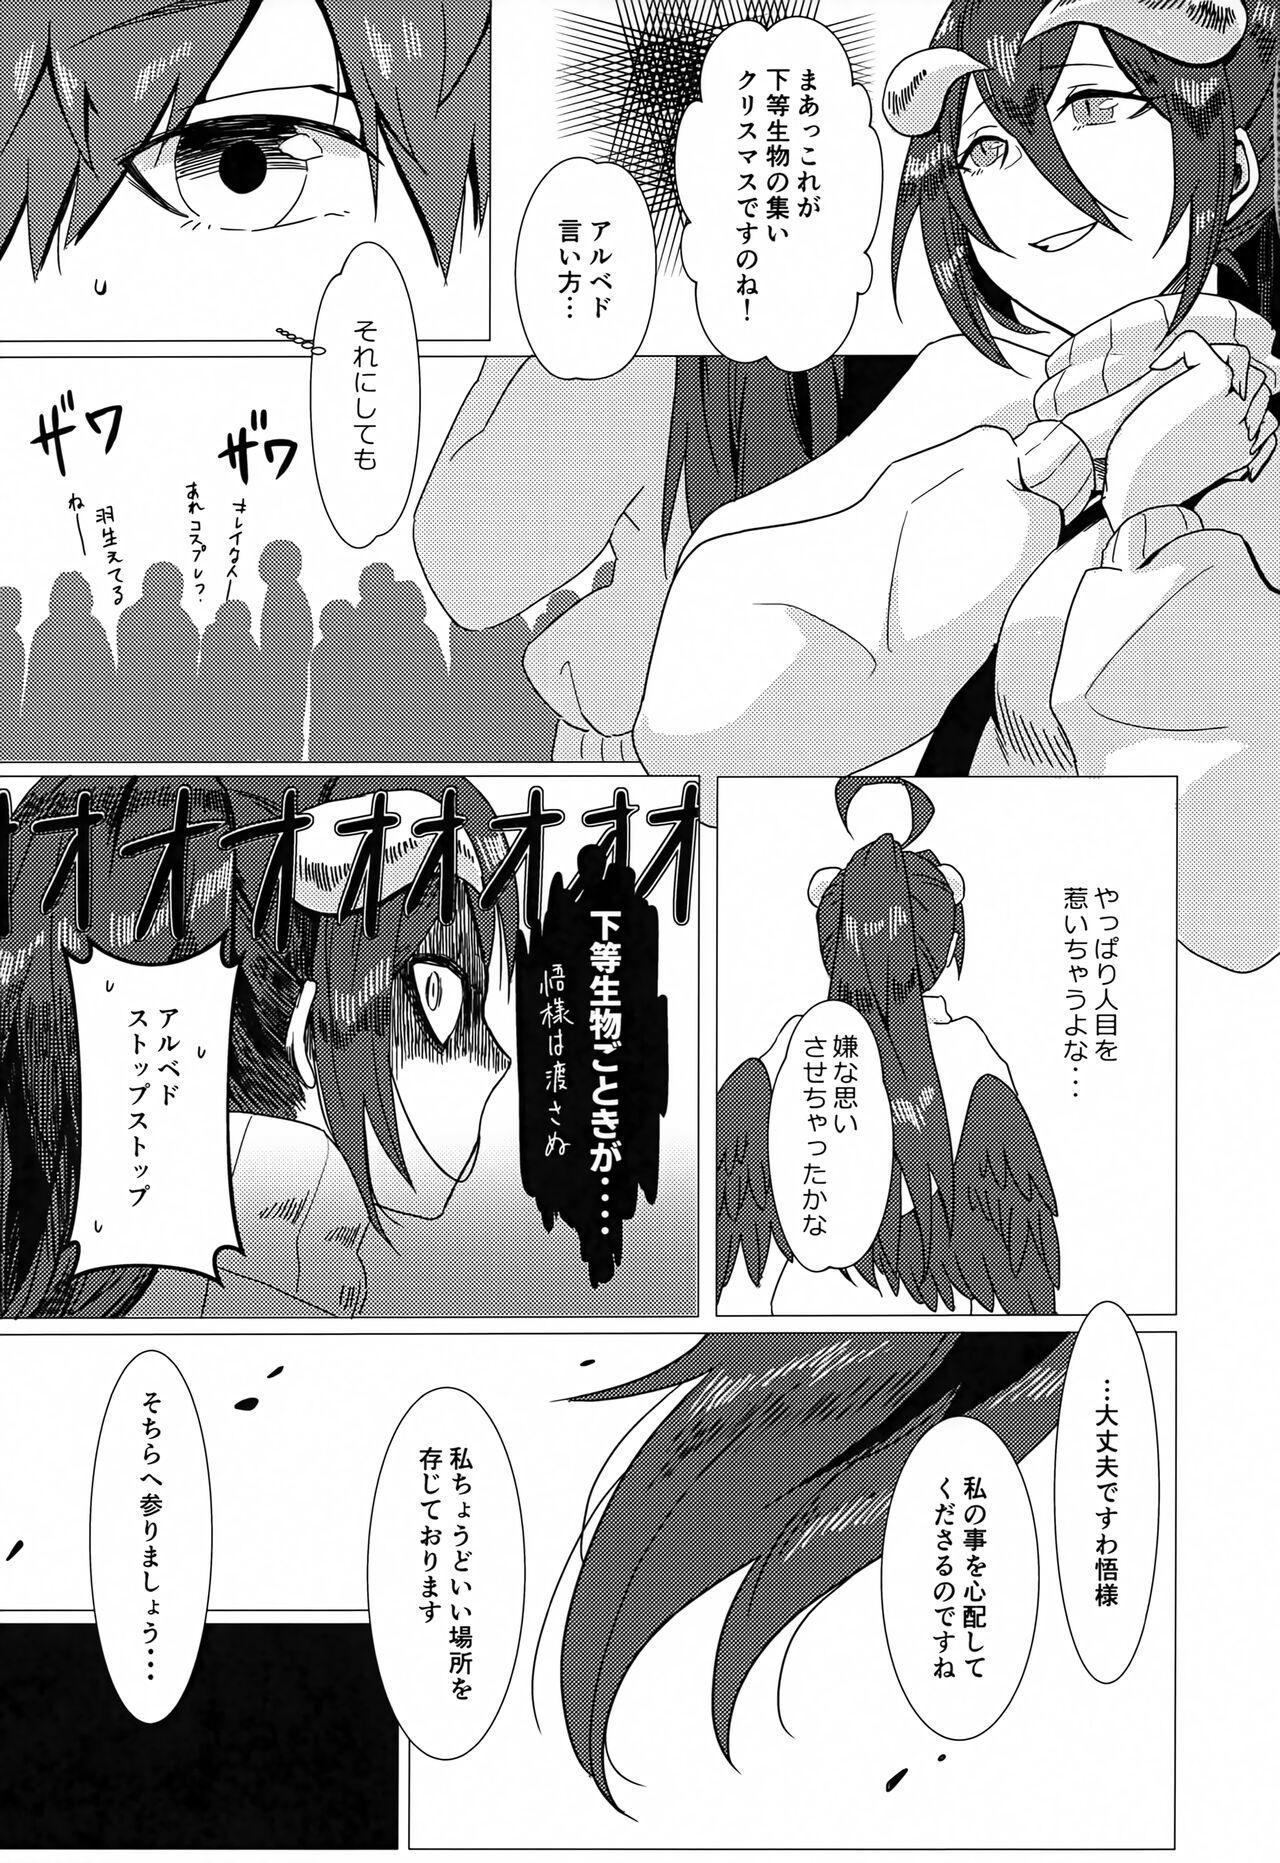 Officesex Albedo-san to! 2 - Overlord Sucking Cocks - Page 6